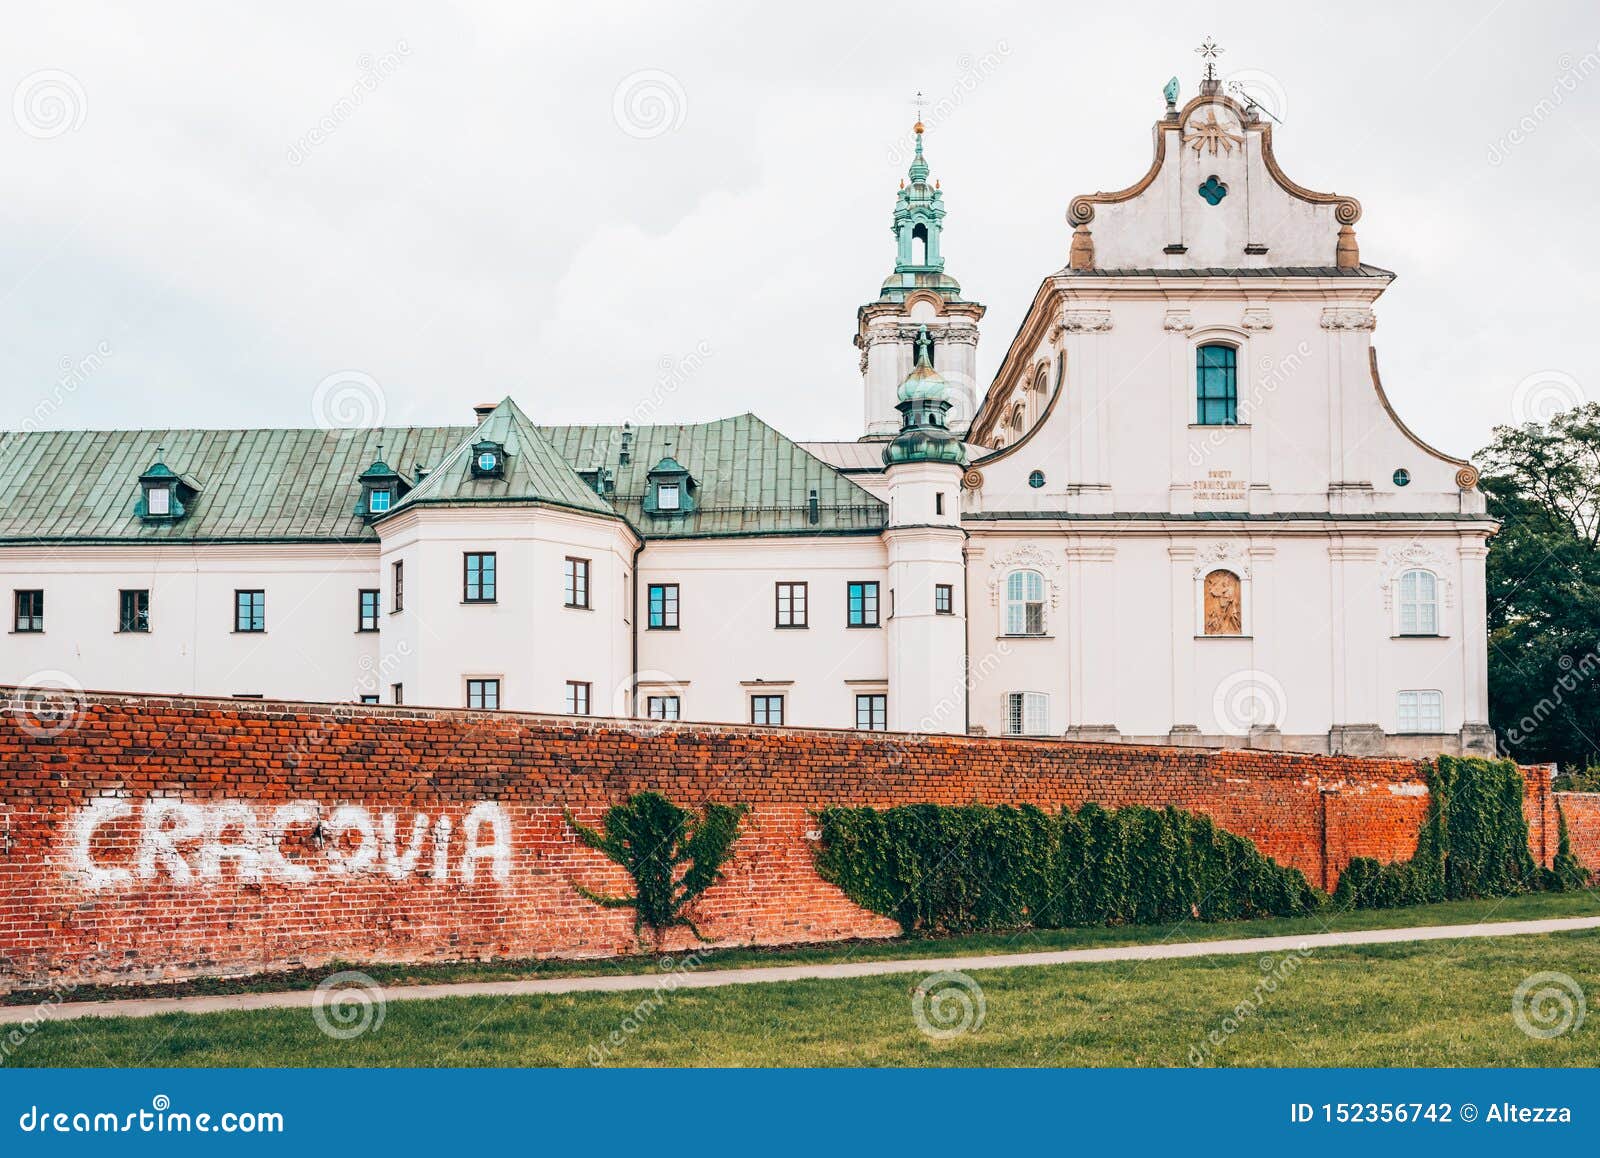 pauline fathers monastery on skalka in krakow with cracovia graffitti on the brick wall.